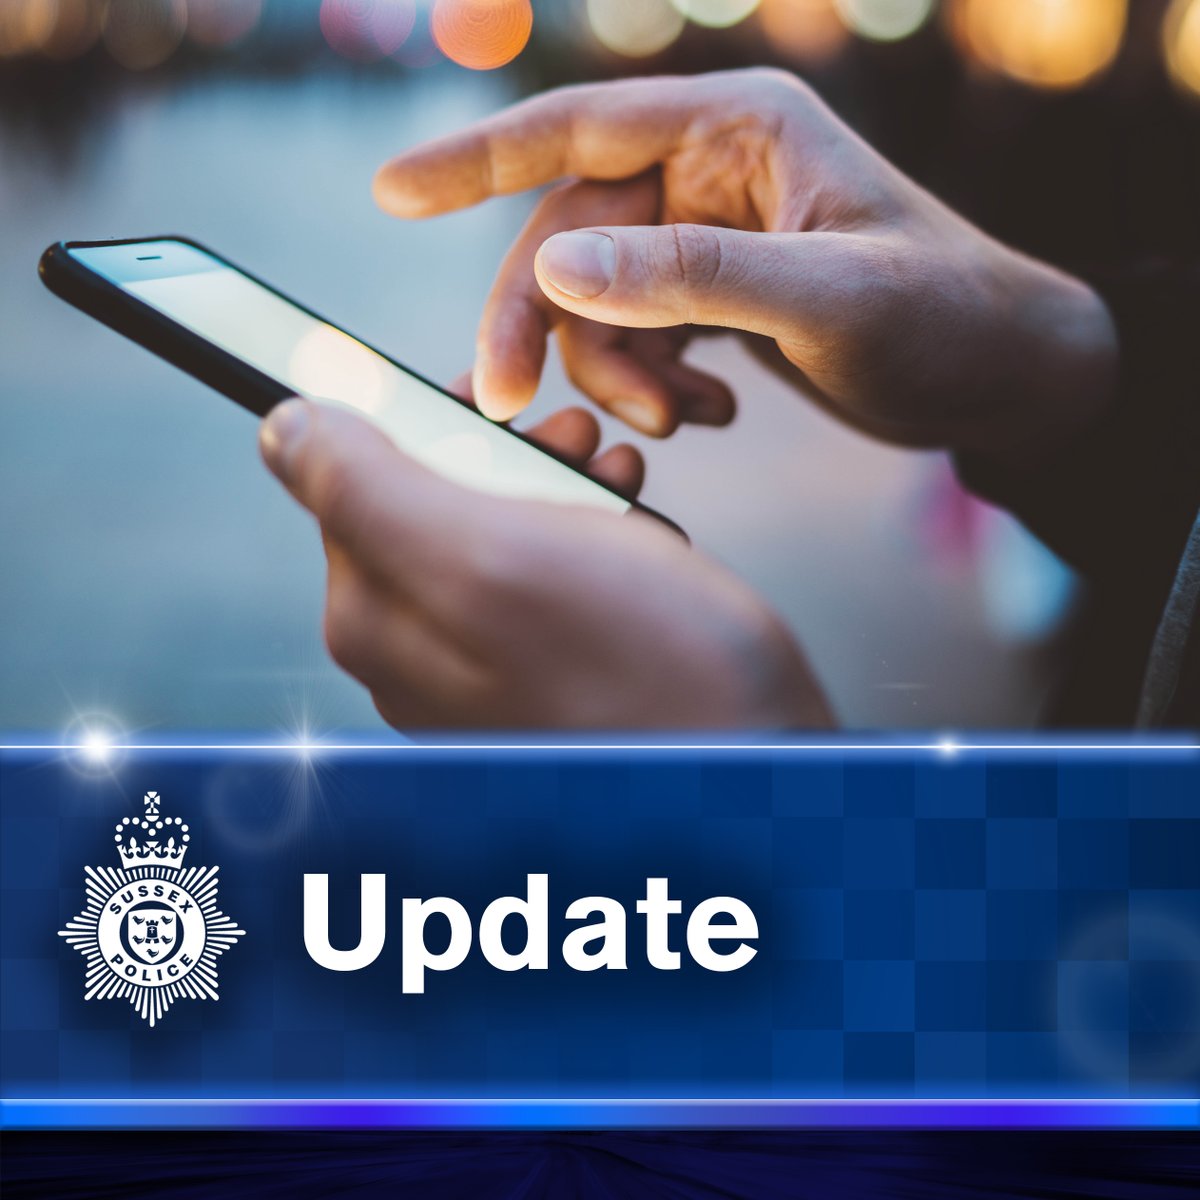 We are extremely sorry to update that a body has been found in the search for 19-year-old Lewis, who was reported missing from Littlehampton. His next of kin have been informed and our thoughts are with them at this incredibly difficult time.